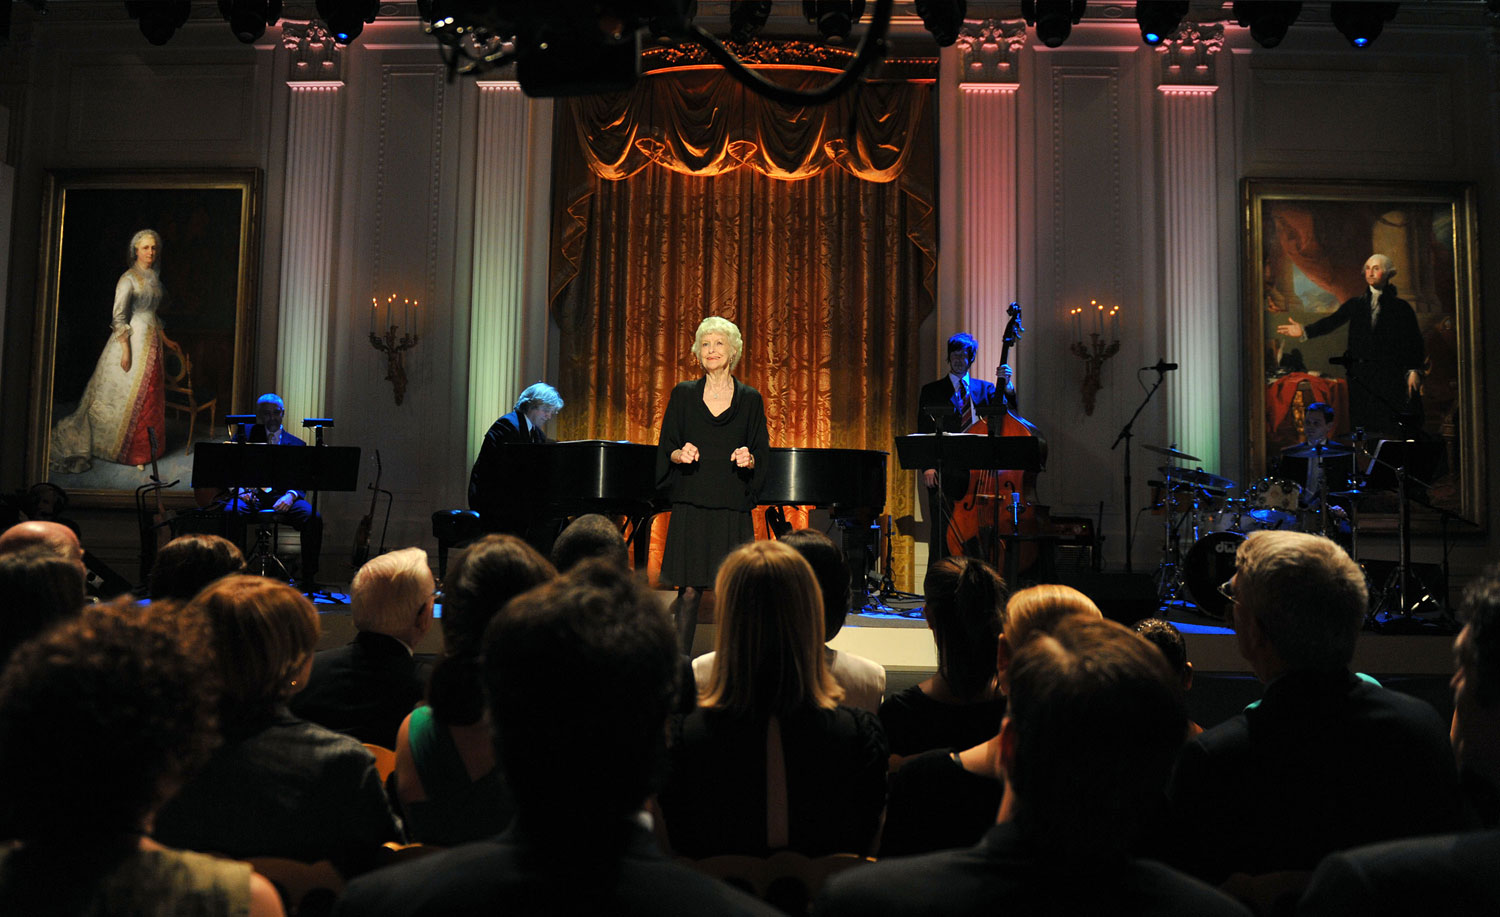 Elaine Stritch performs during a White House music series concert saluting Broadway in the East Room at the White House in Washington on July 19, 2010.